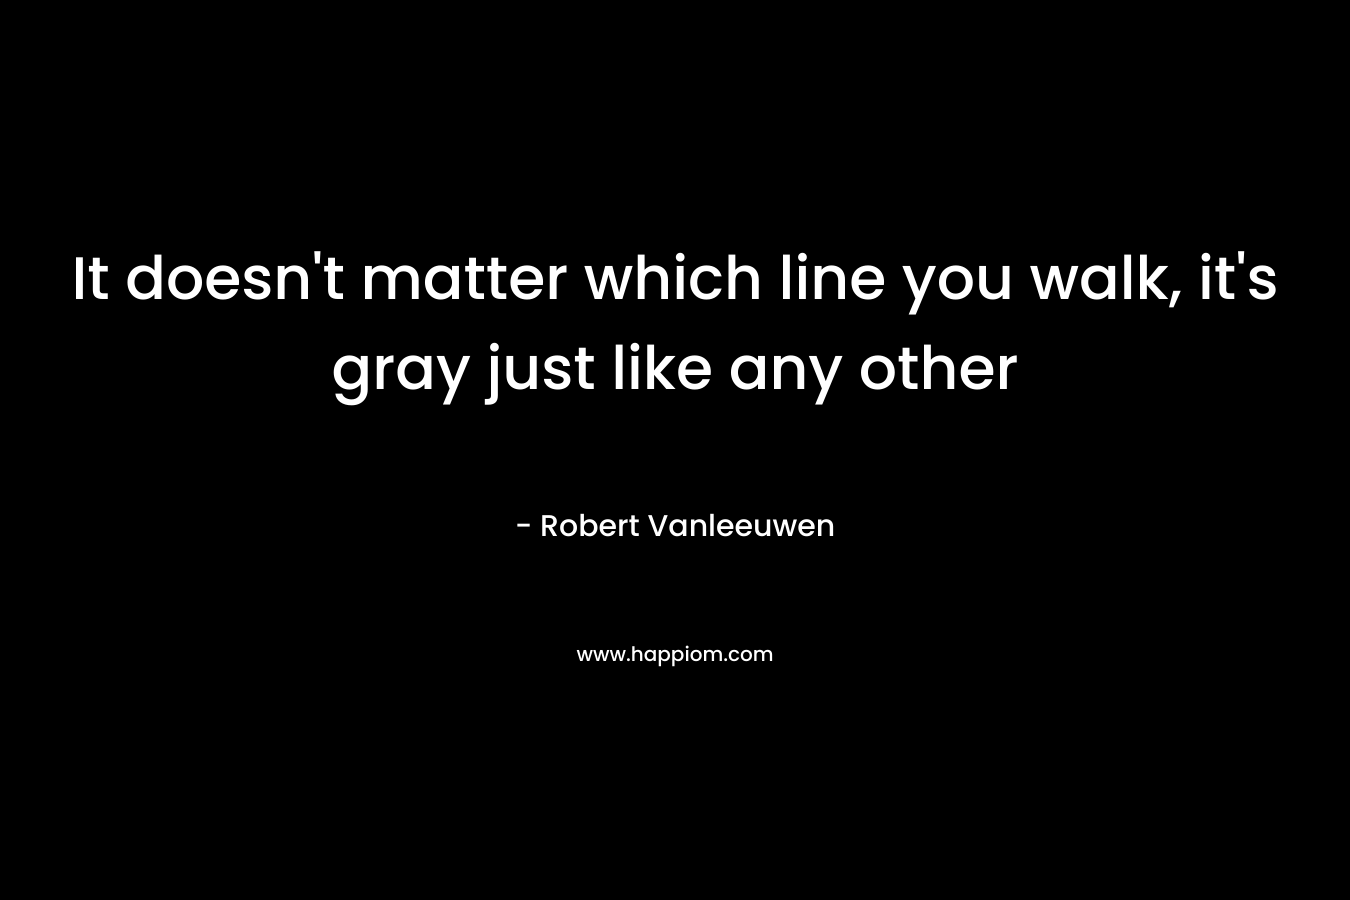 It doesn't matter which line you walk, it's gray just like any other